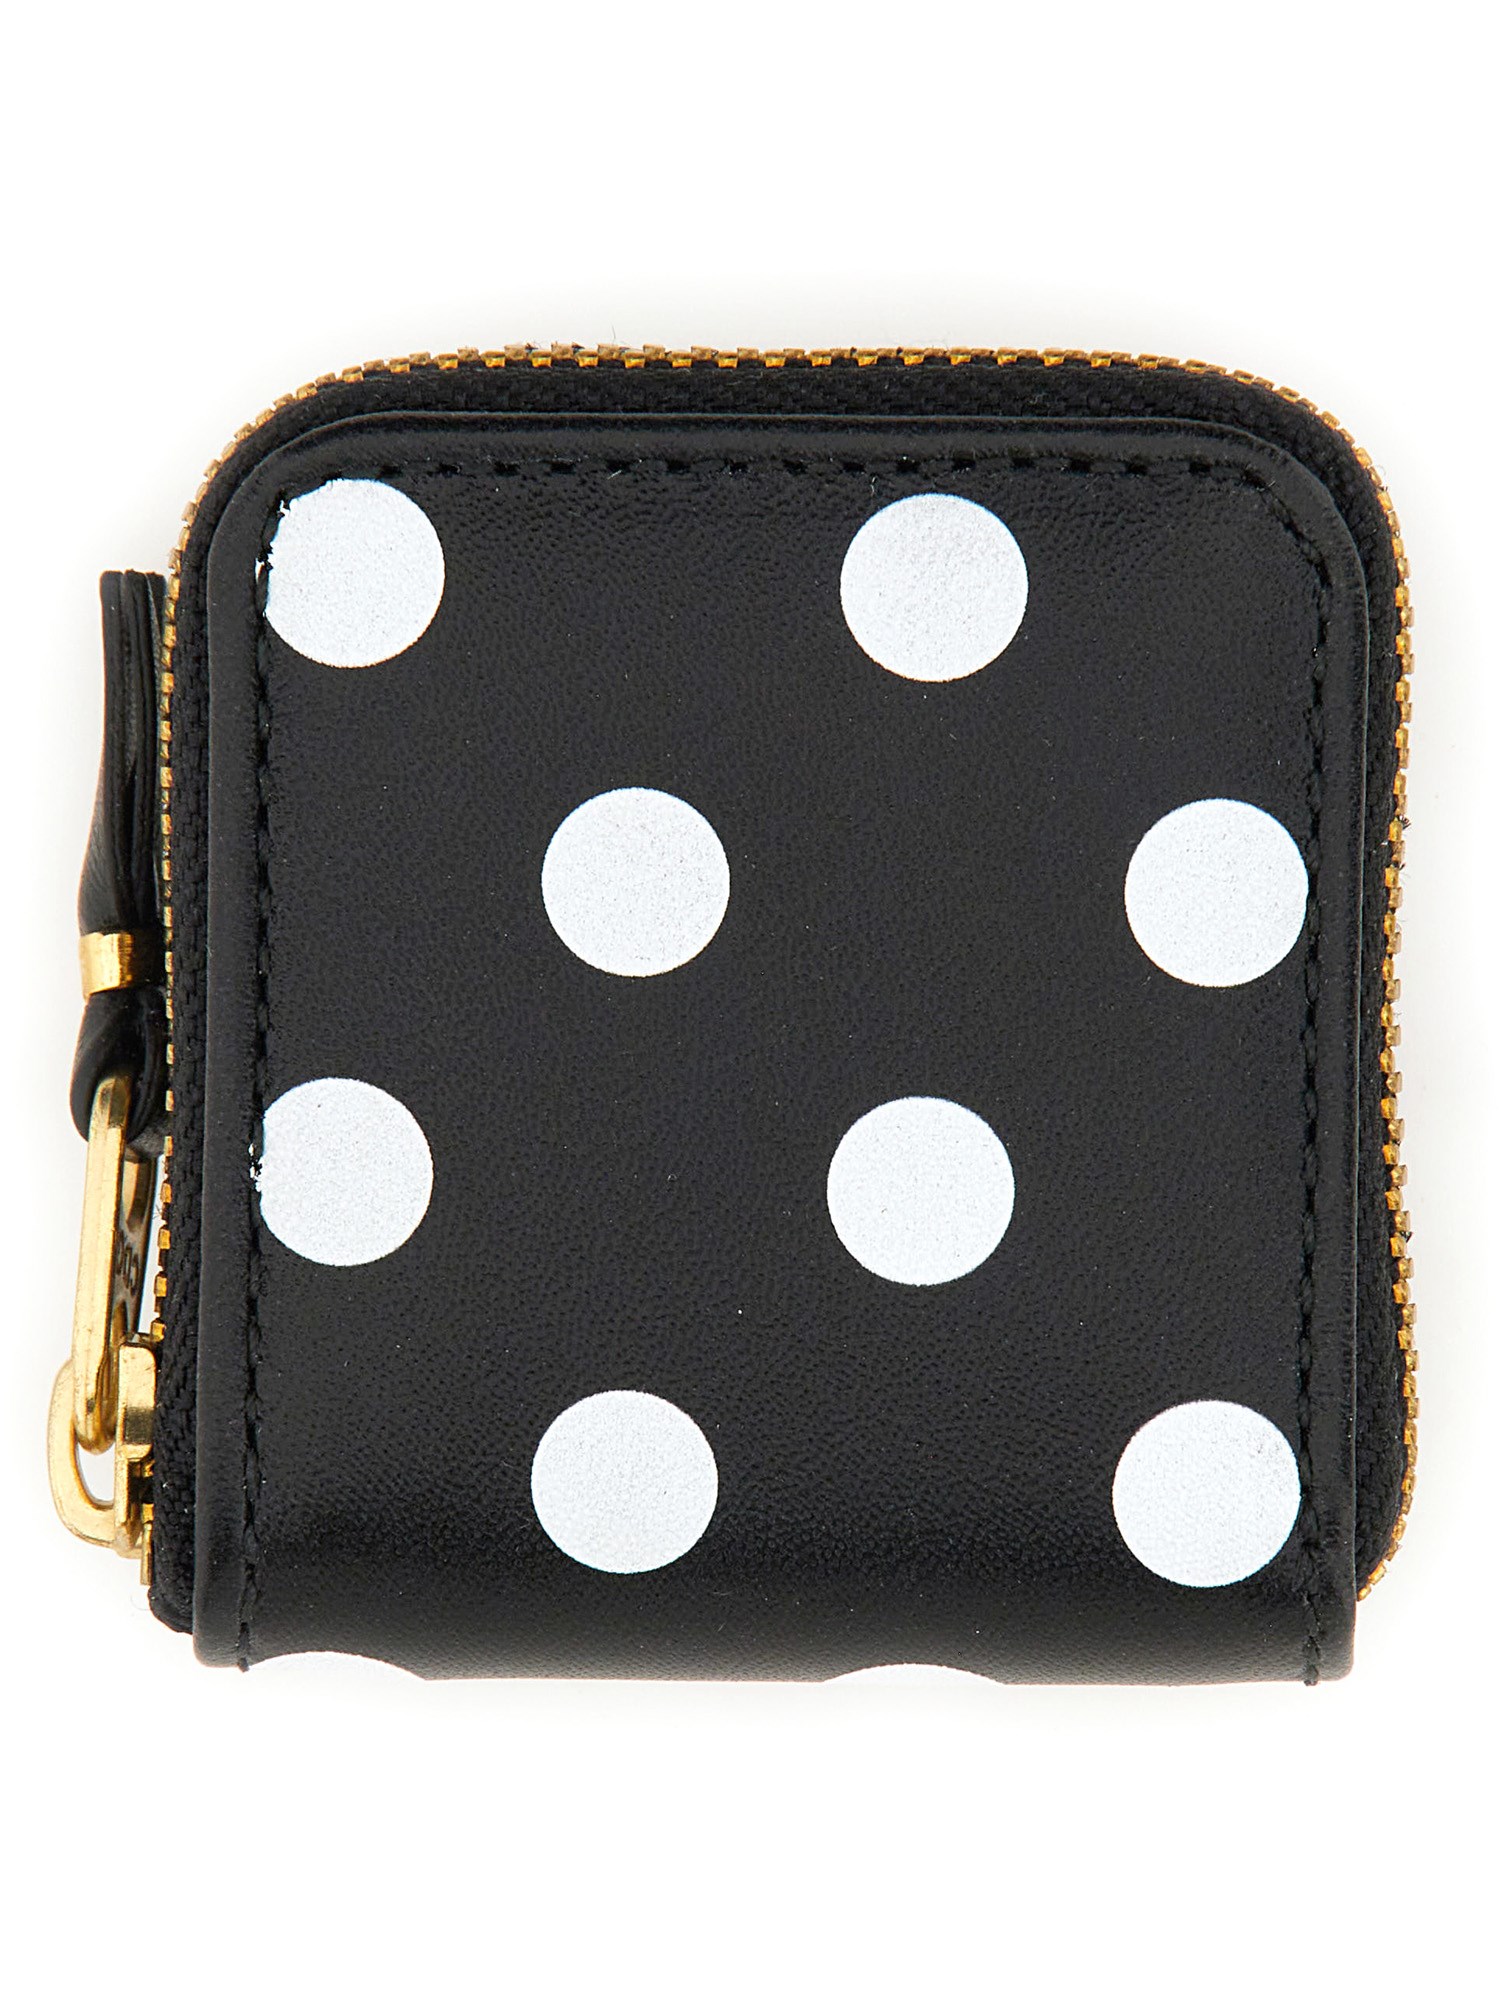 COMME DES GARCONS WALLET comme des garcons wallet leather coin purse